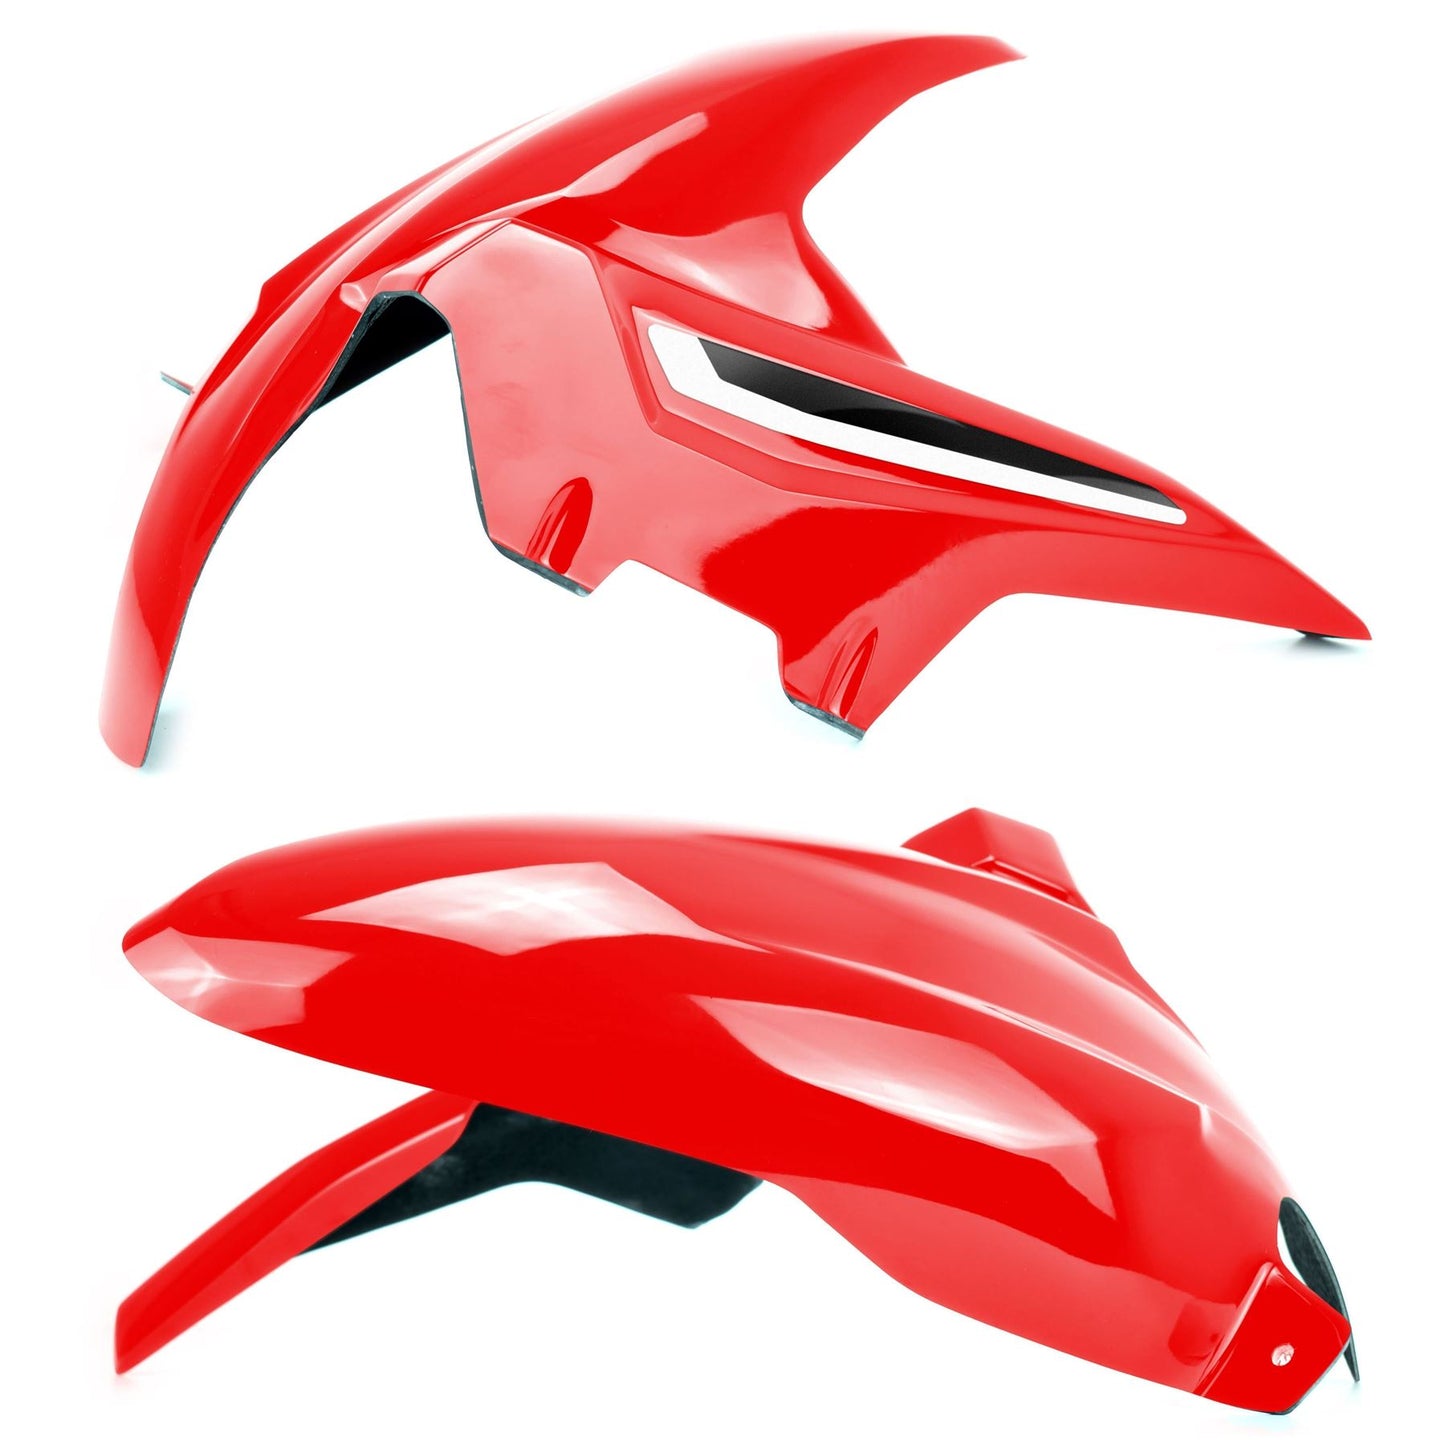 Pyramid Hugger Red for Honda CRF 1000 L Africa Twin 15-19 / Adv Sports 18-19